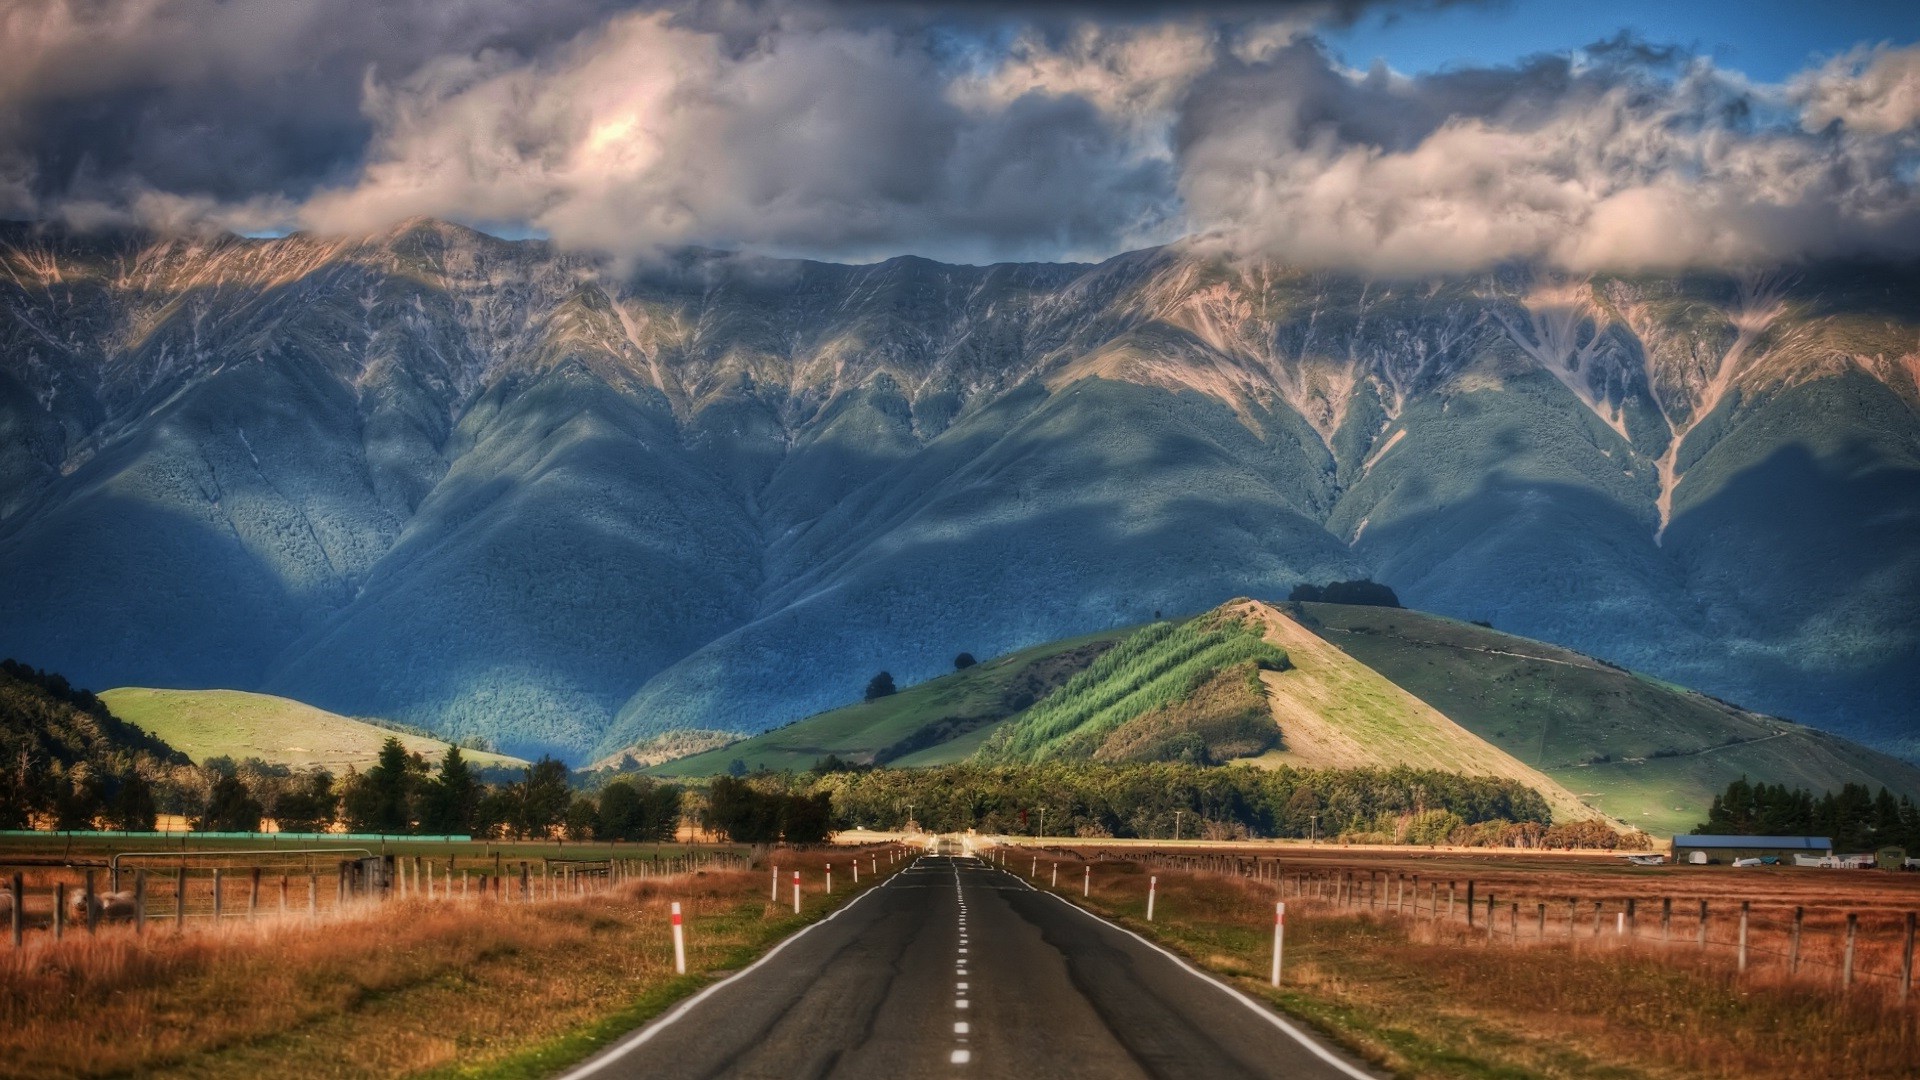 nature, Landscape, New Zealand, Mountain, Clouds, Hill, Trees, Road, Fence, Shadow, HDR Wallpaper